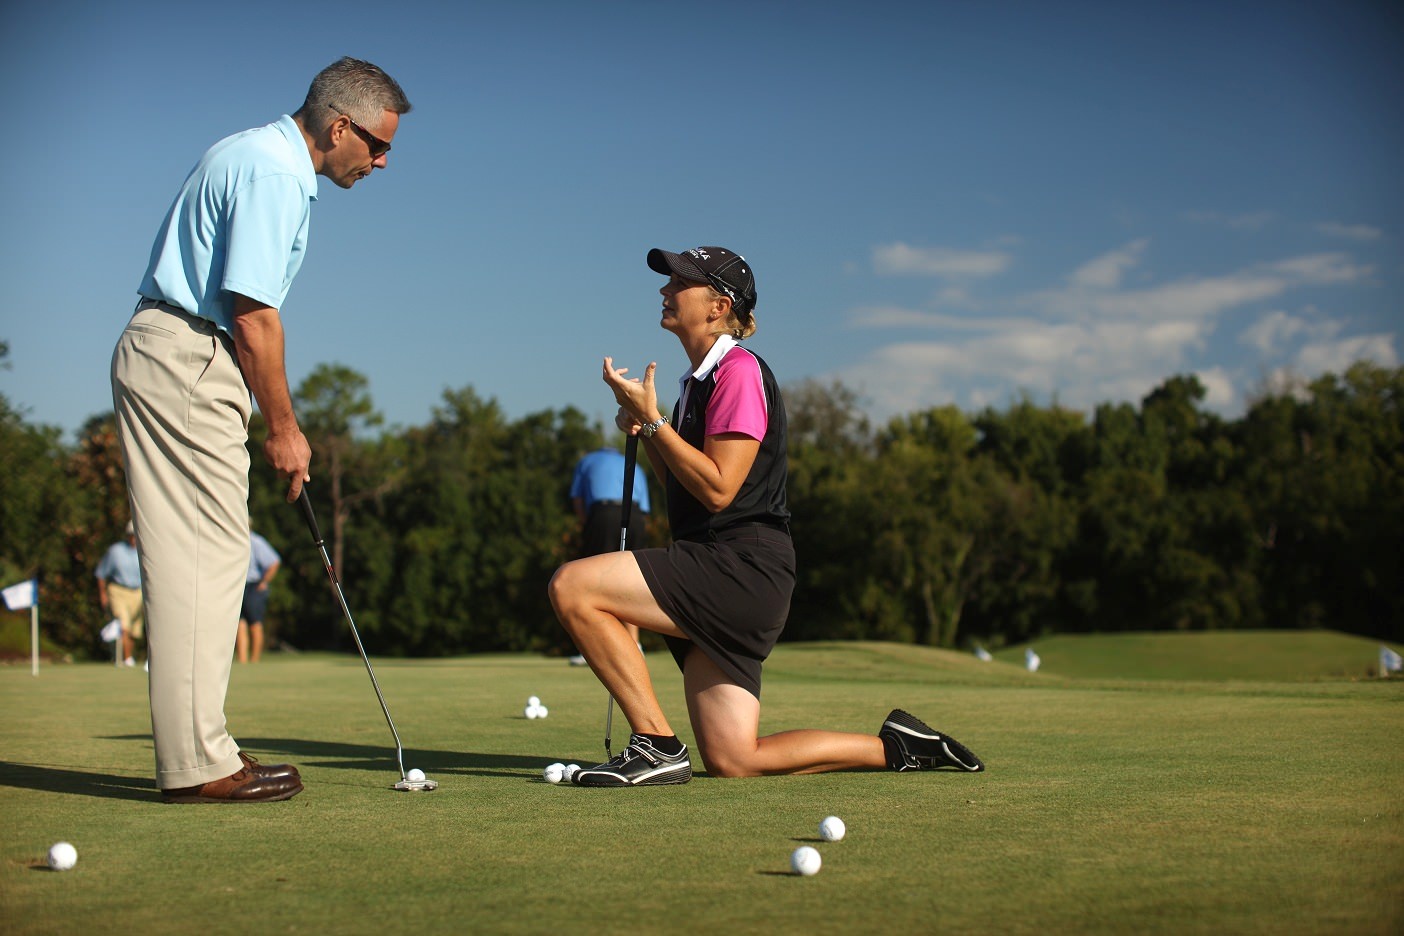 Golf Training Courses and Golf Swing Lessons: Learning to.